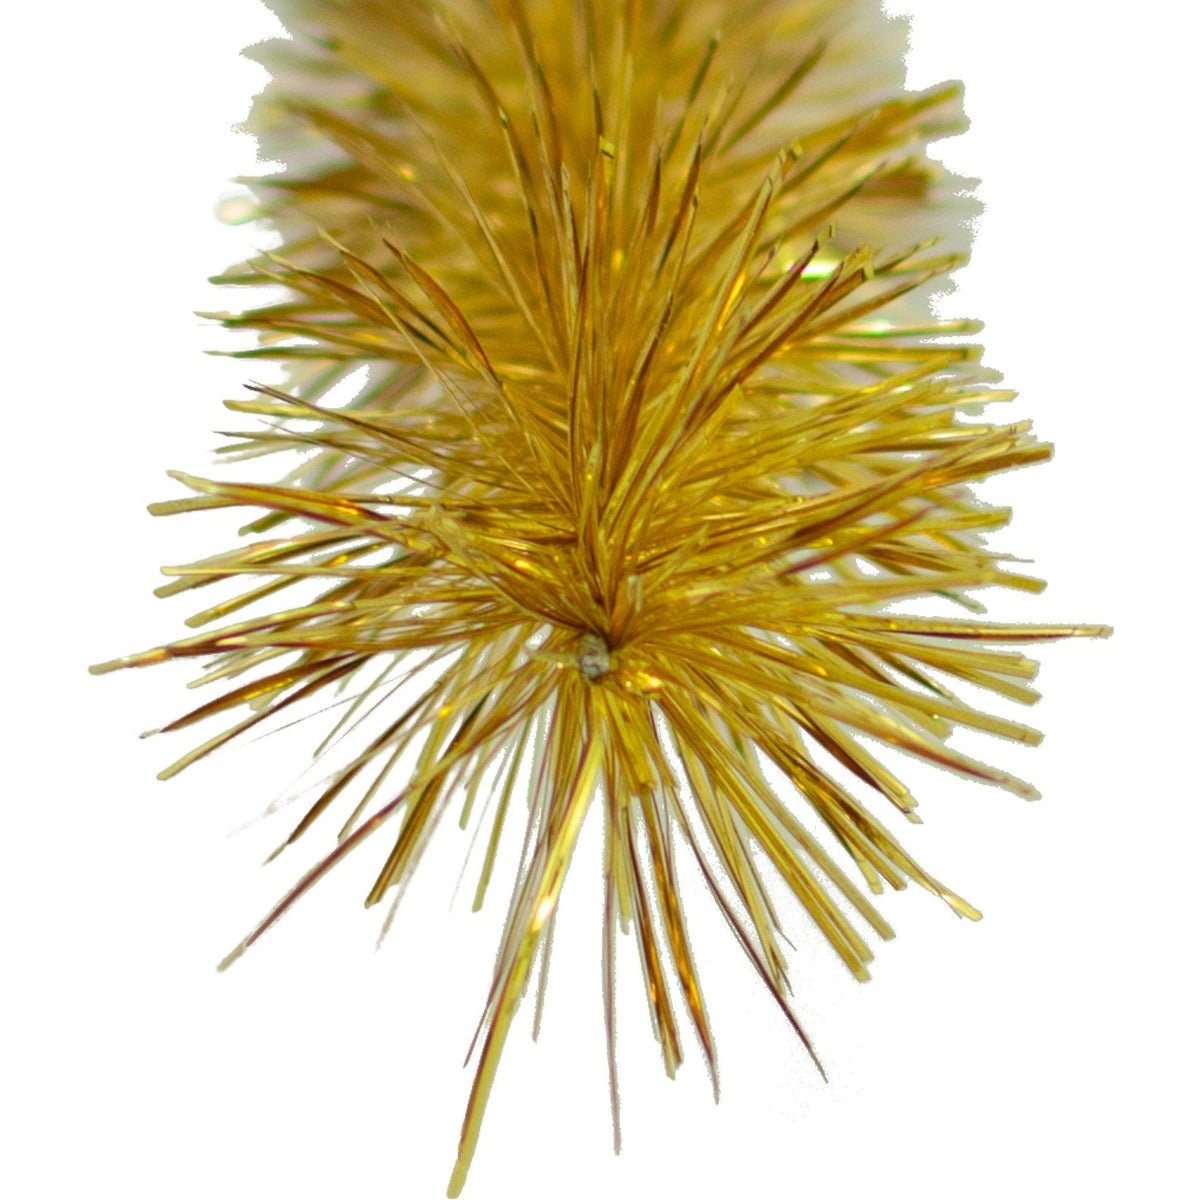 Lee Display's brand new 25ft Gold Tinsel Garlands and Fringe Embellishments on sale now at leedisplay.com